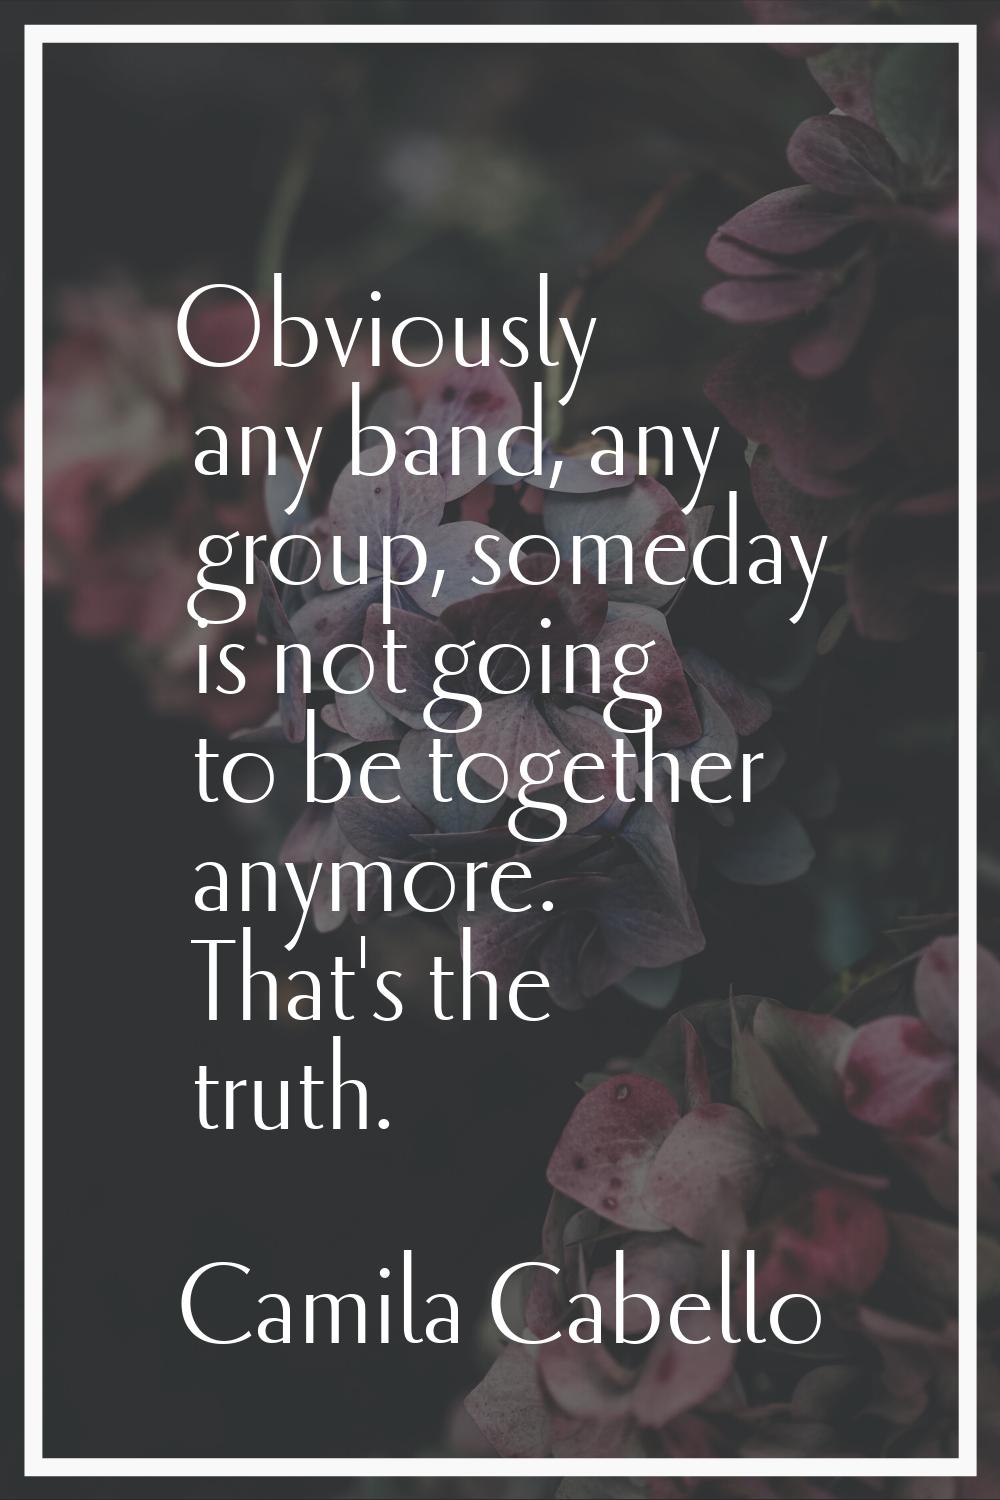 Obviously any band, any group, someday is not going to be together anymore. That's the truth.